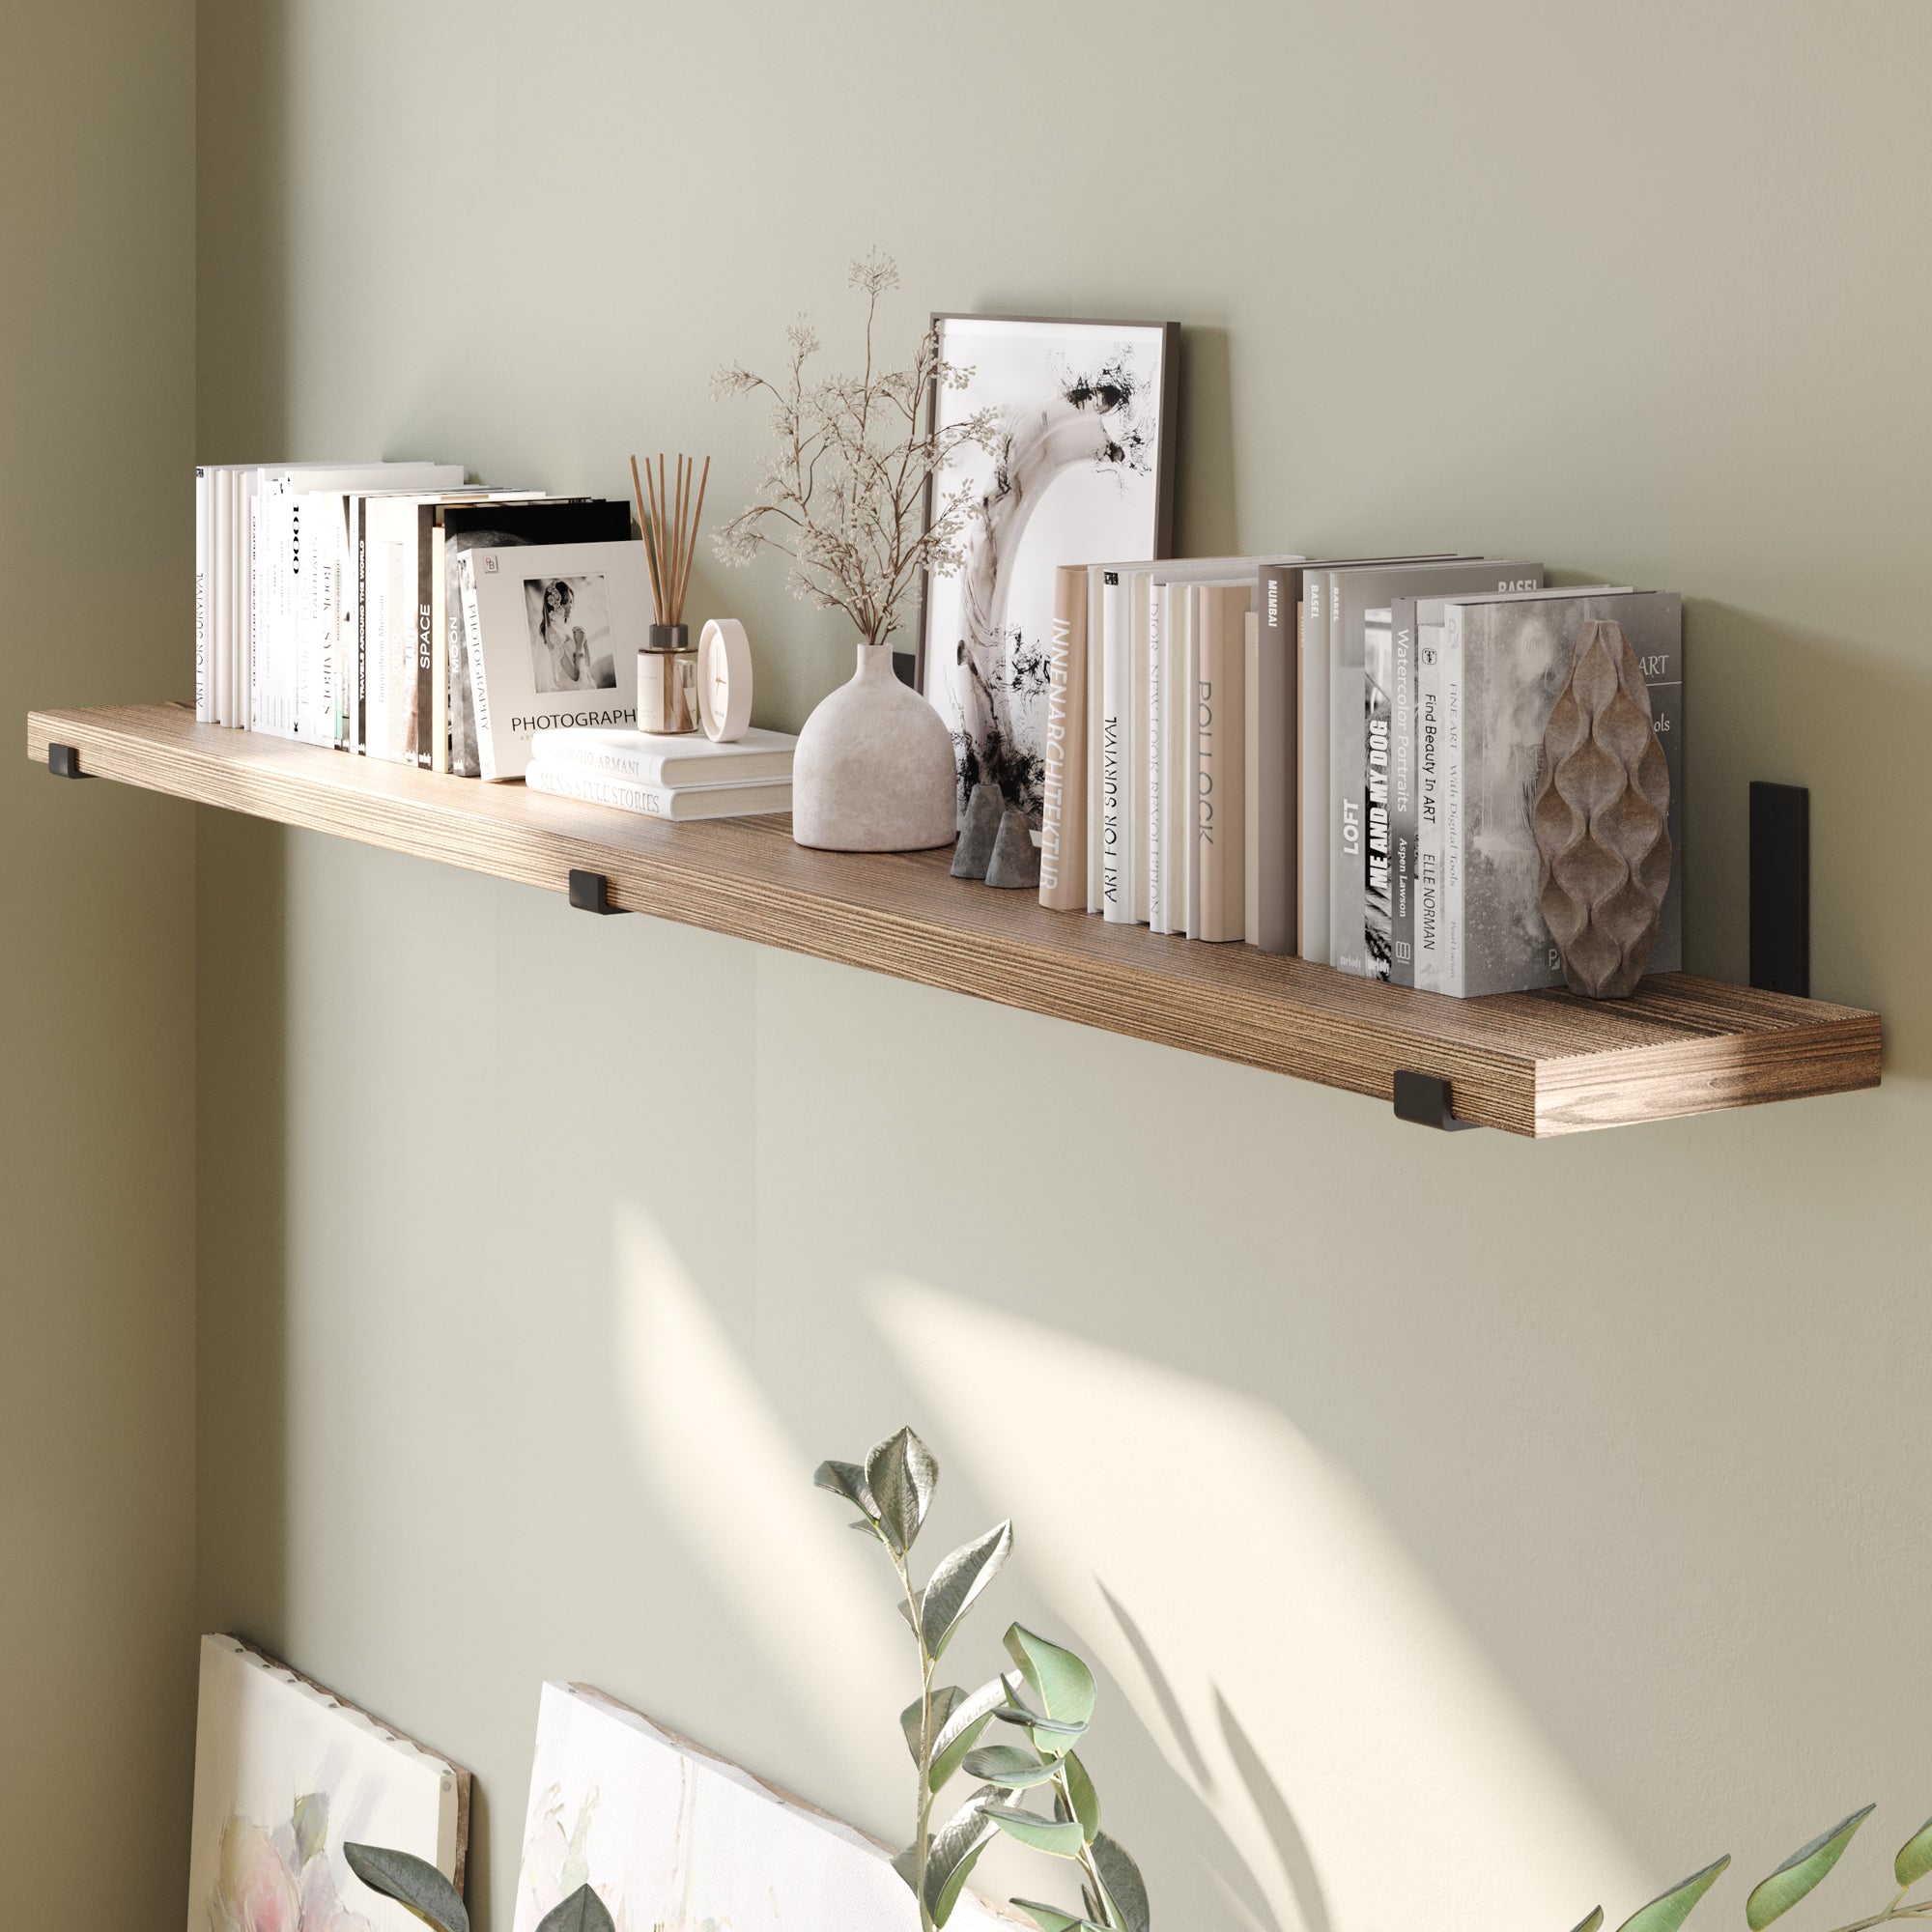 A wall shelf with books, a vase, and framed pictures.